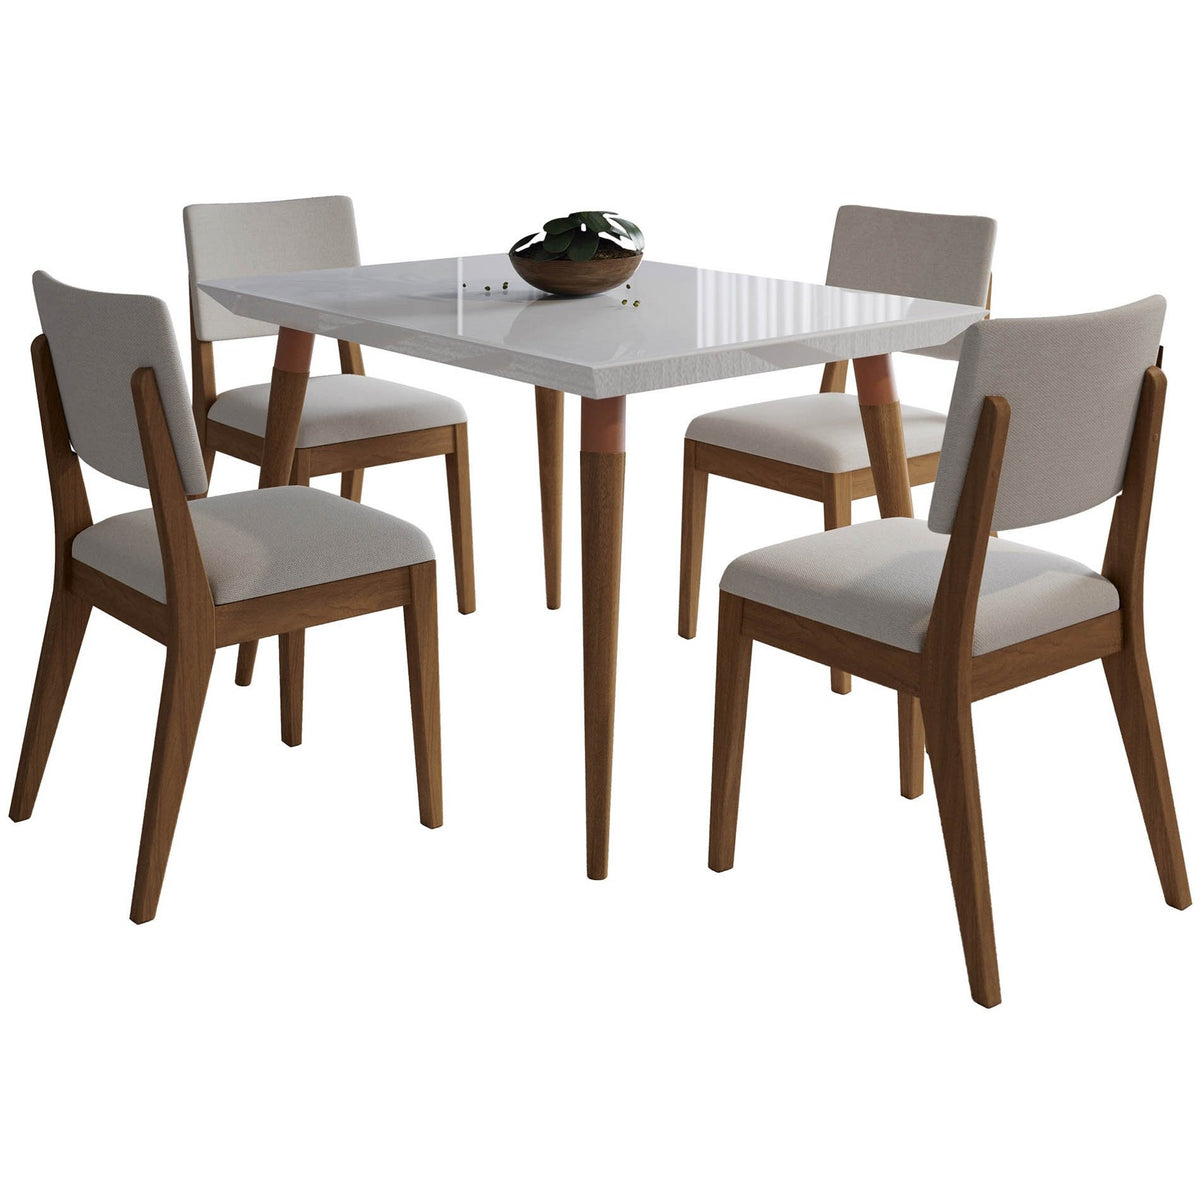 Manhattan Comfort 5-Piece Utopia 47.24" and Dover Dining Set with 4 Dining Chairs in White Gloss and Beige-Minimal & Modern